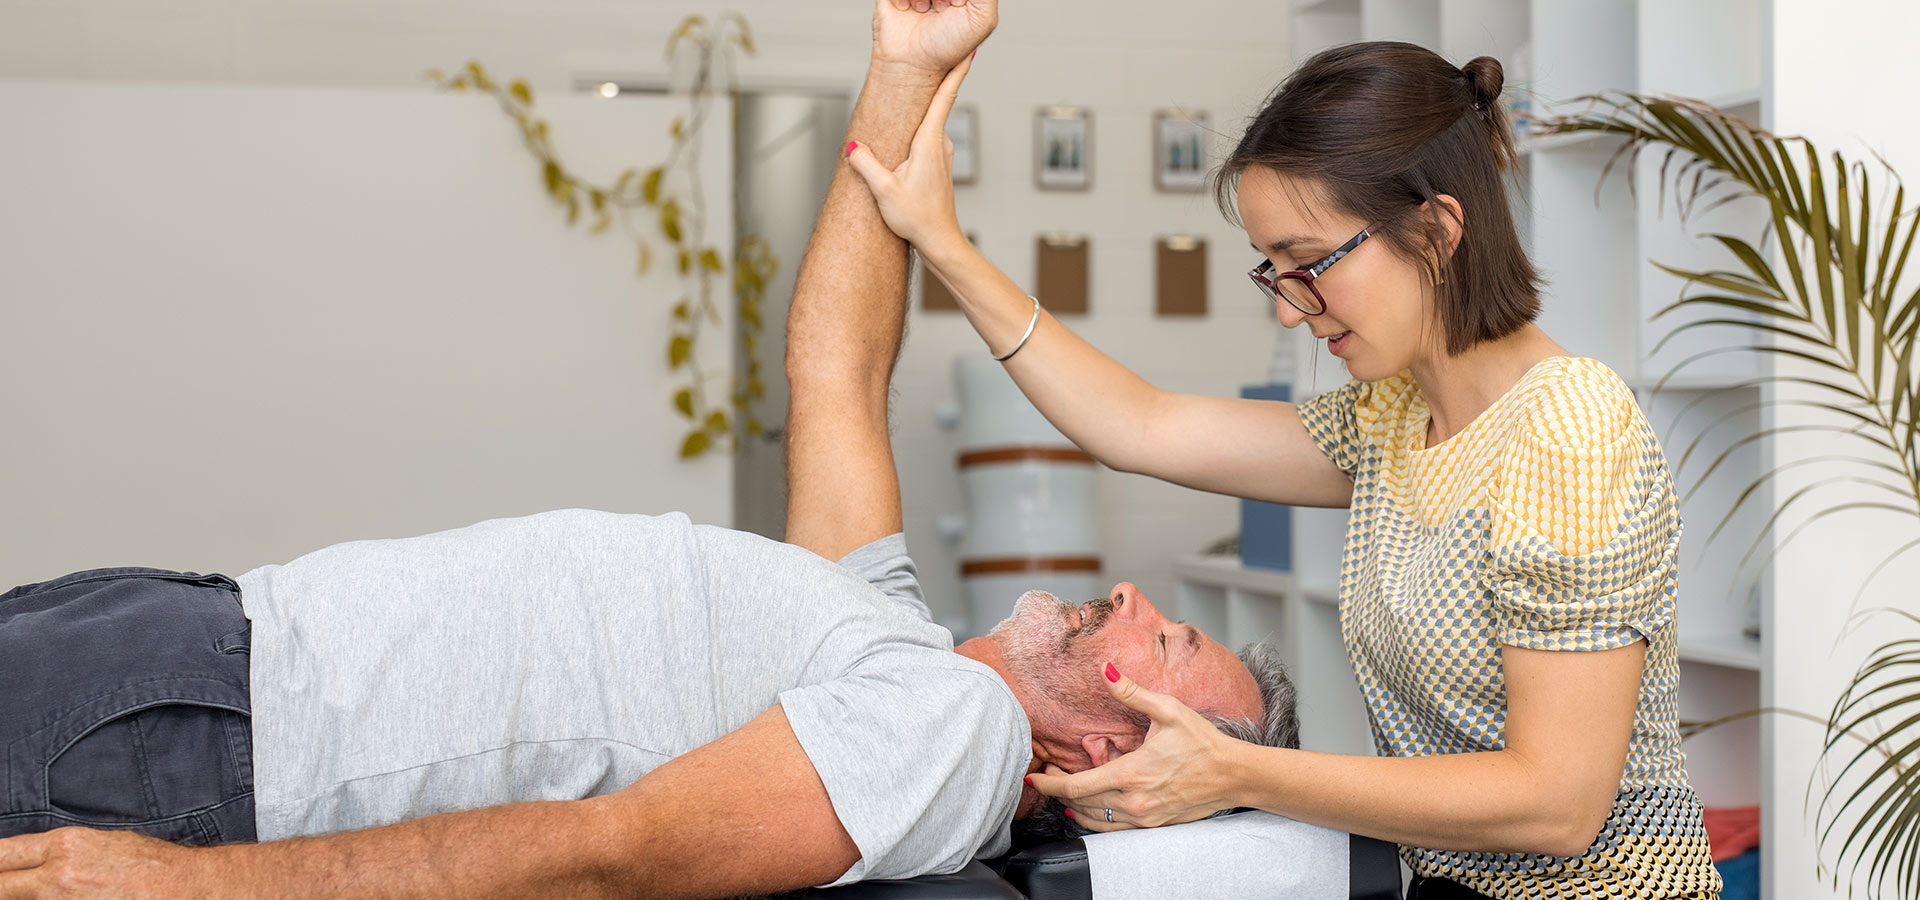 Getting Ready for Your Physiotherapy Services in Ottawa –But How?